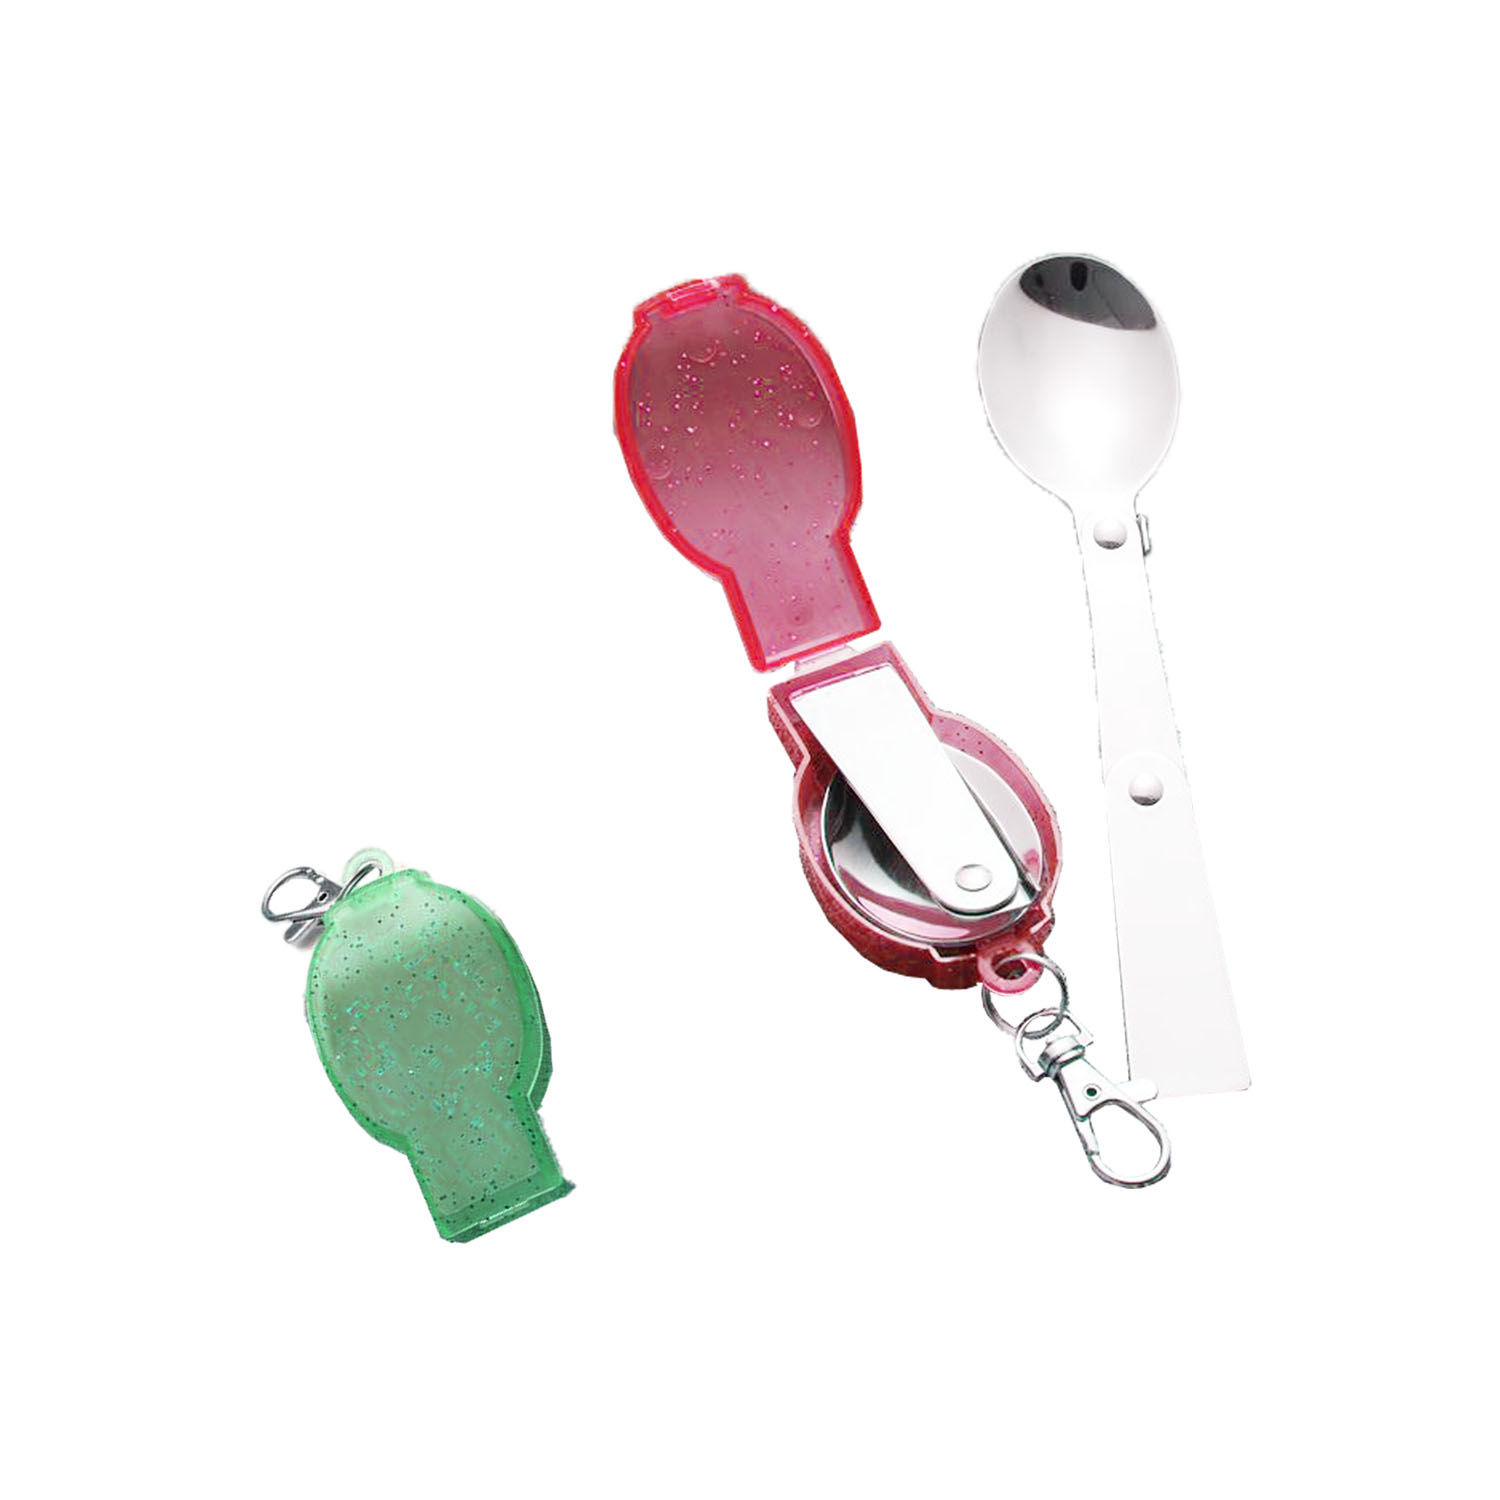 GL-AAJ1067 Stainless Steel Folding Spoon with Carry Case